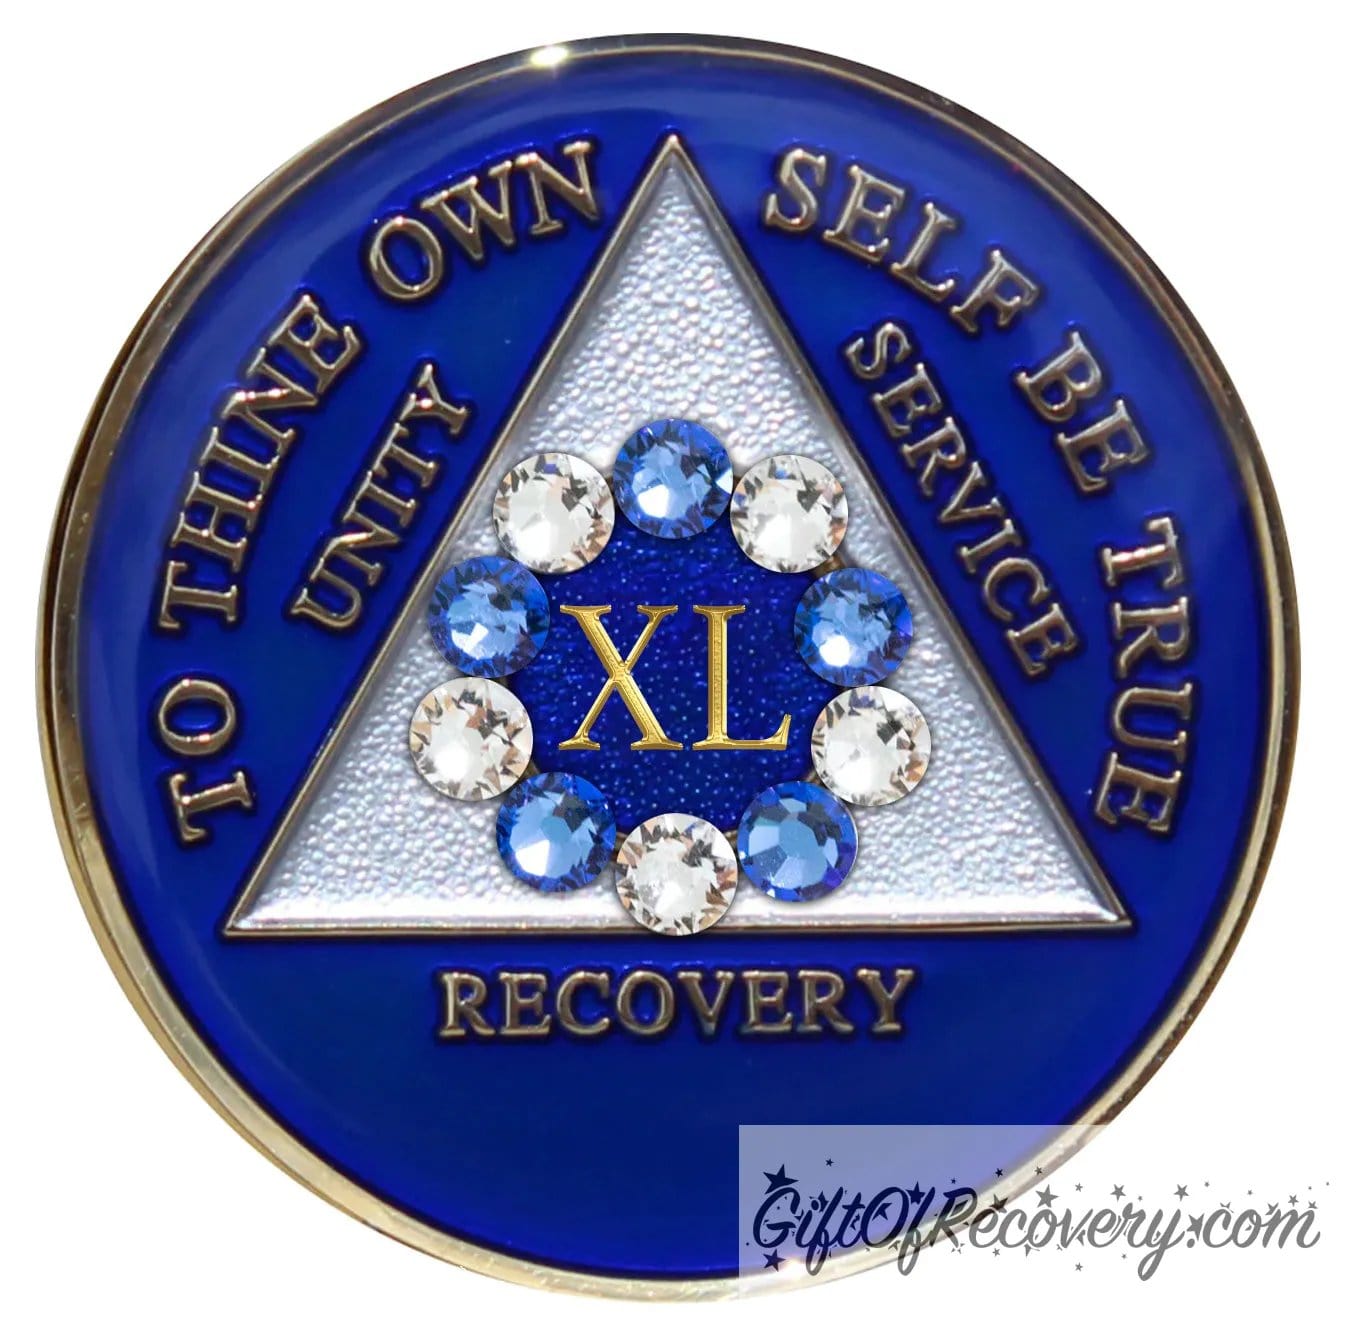 40 Year Big Book Blue AA medallion with 5 blue genuine crystals and 5 clear genuine crystal, making a circle around the 40 year, the recovery medallion has raised lettering to thine own self be true, and the outer rim of the medallion in 14k gold, inside the triangle is white and blue, emphasizing action and reflection.